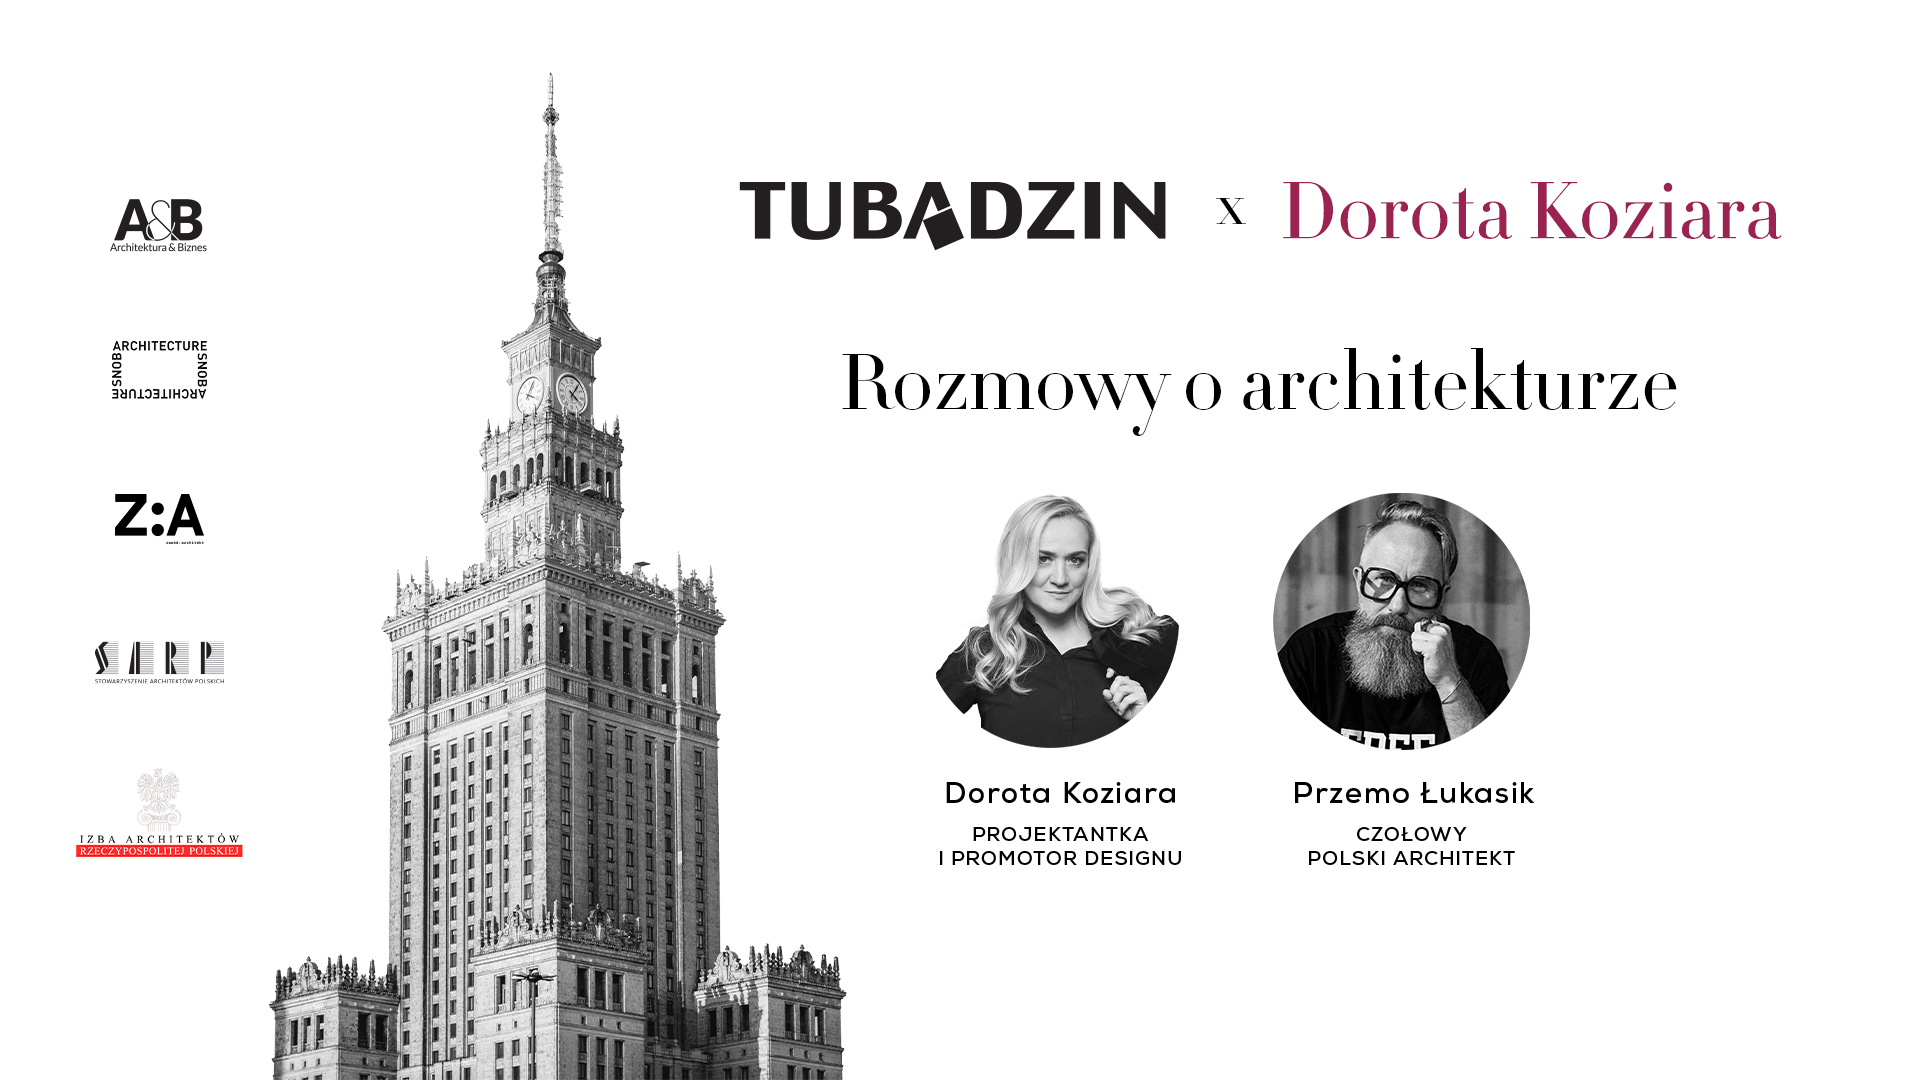 “Conversations about architecture” with Dorota Koziara